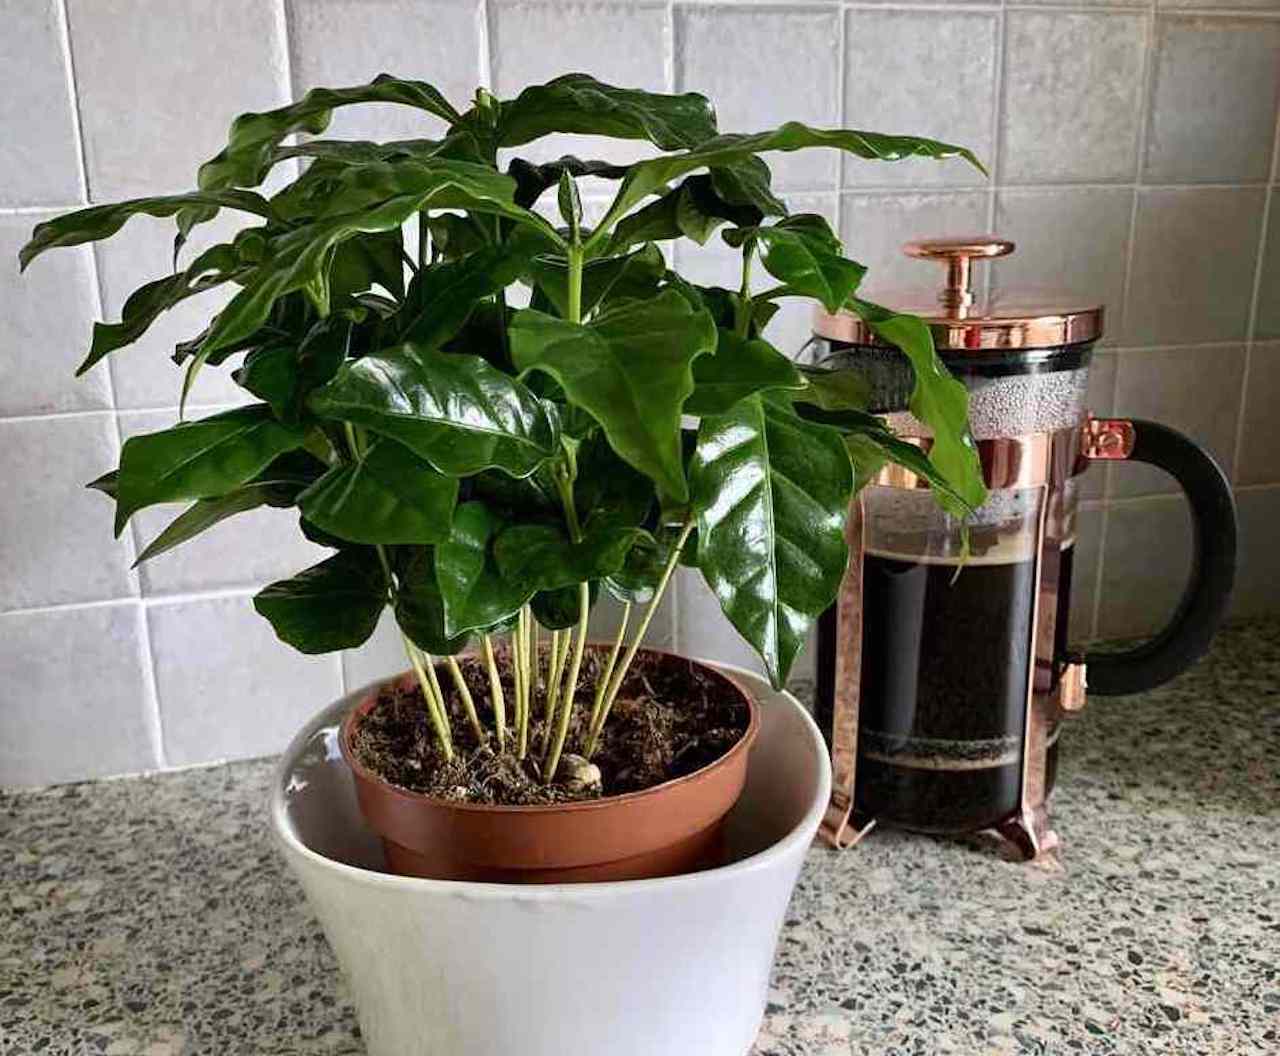 Young coffee plants